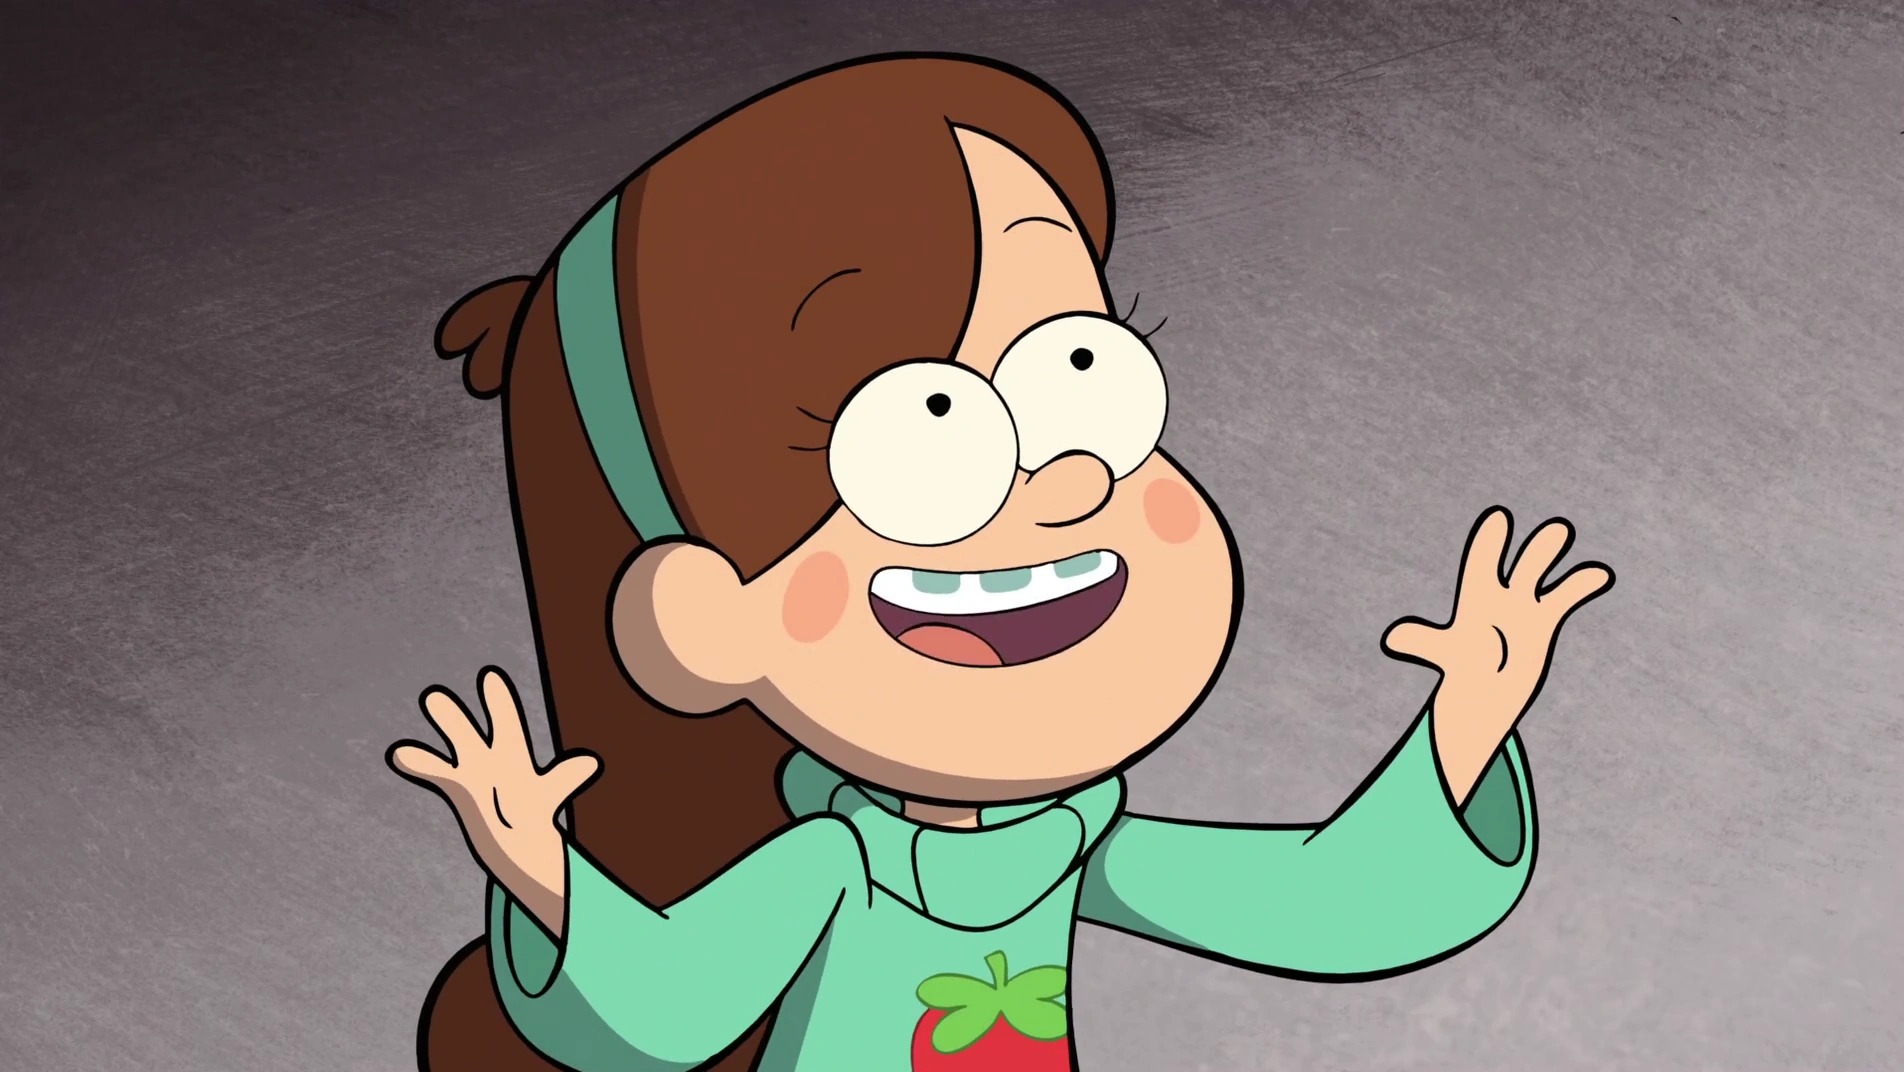 amado vasquez add images of mabel from gravity falls photo